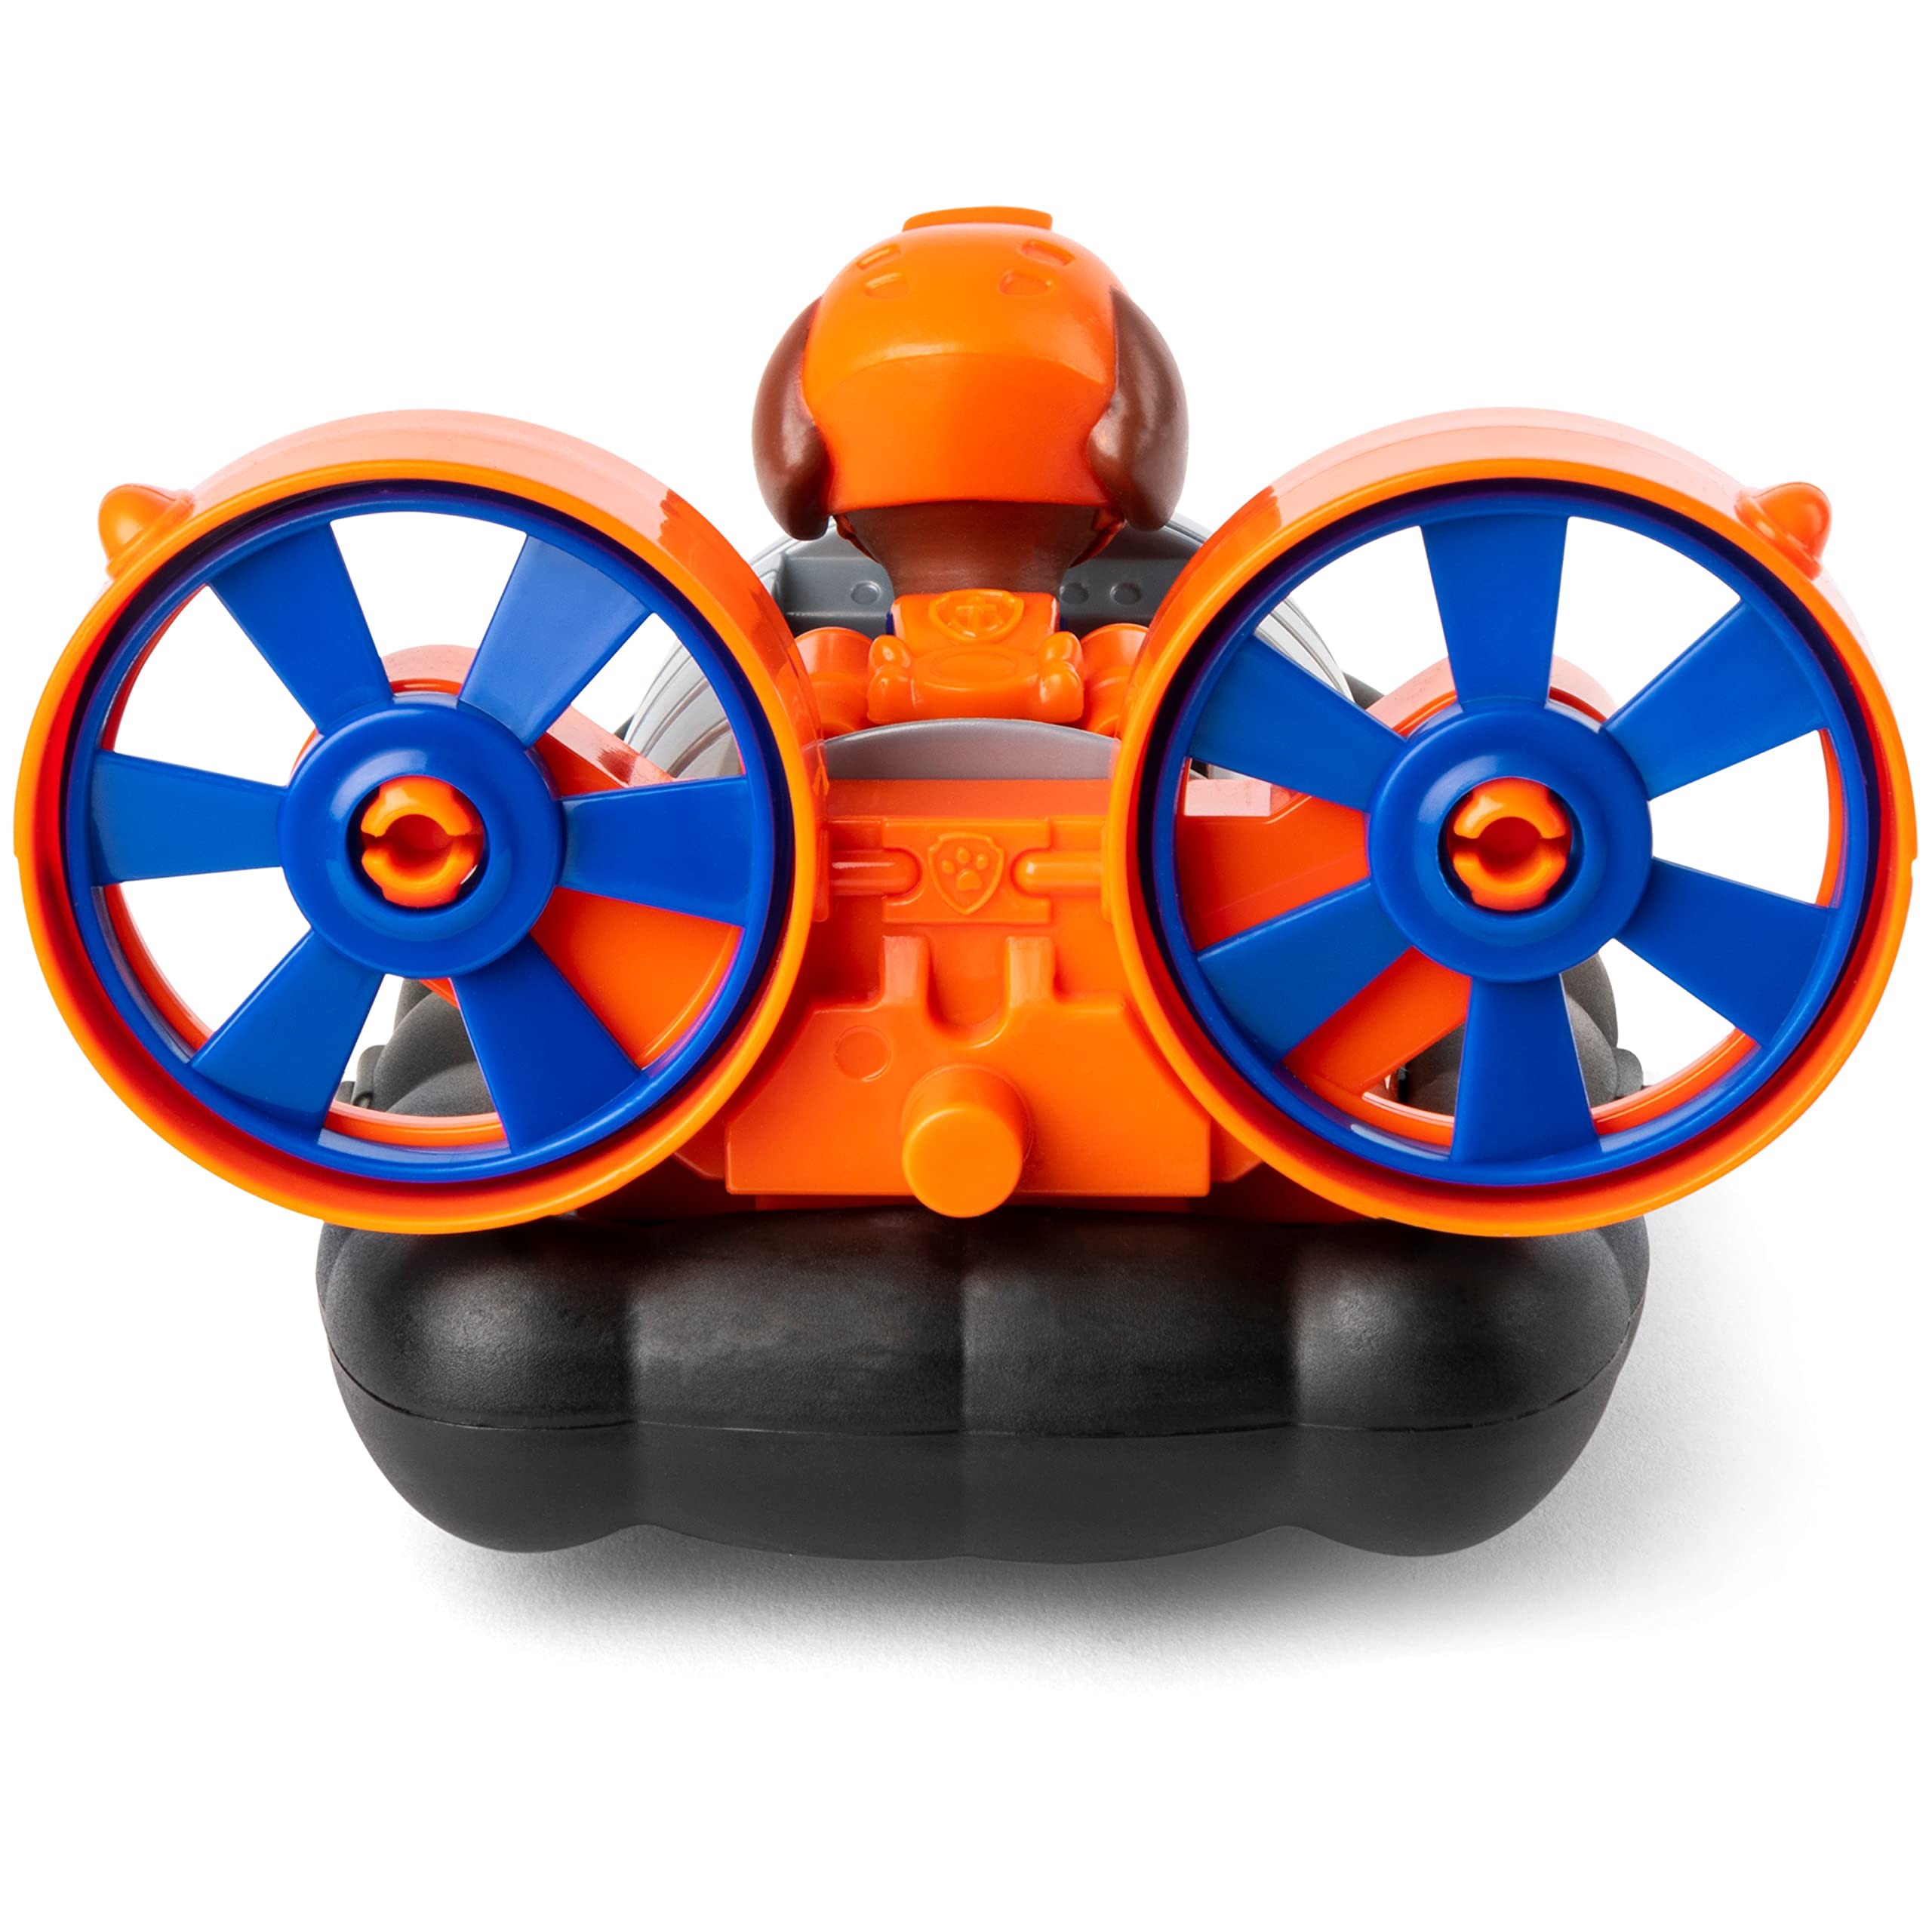 Paw Patrol, Zuma’s Hovercraft, Toy Vehicle with Collectible Action Figure, Sustainably Minded Kids Toys for Boys & Girls Ages 3 and Up